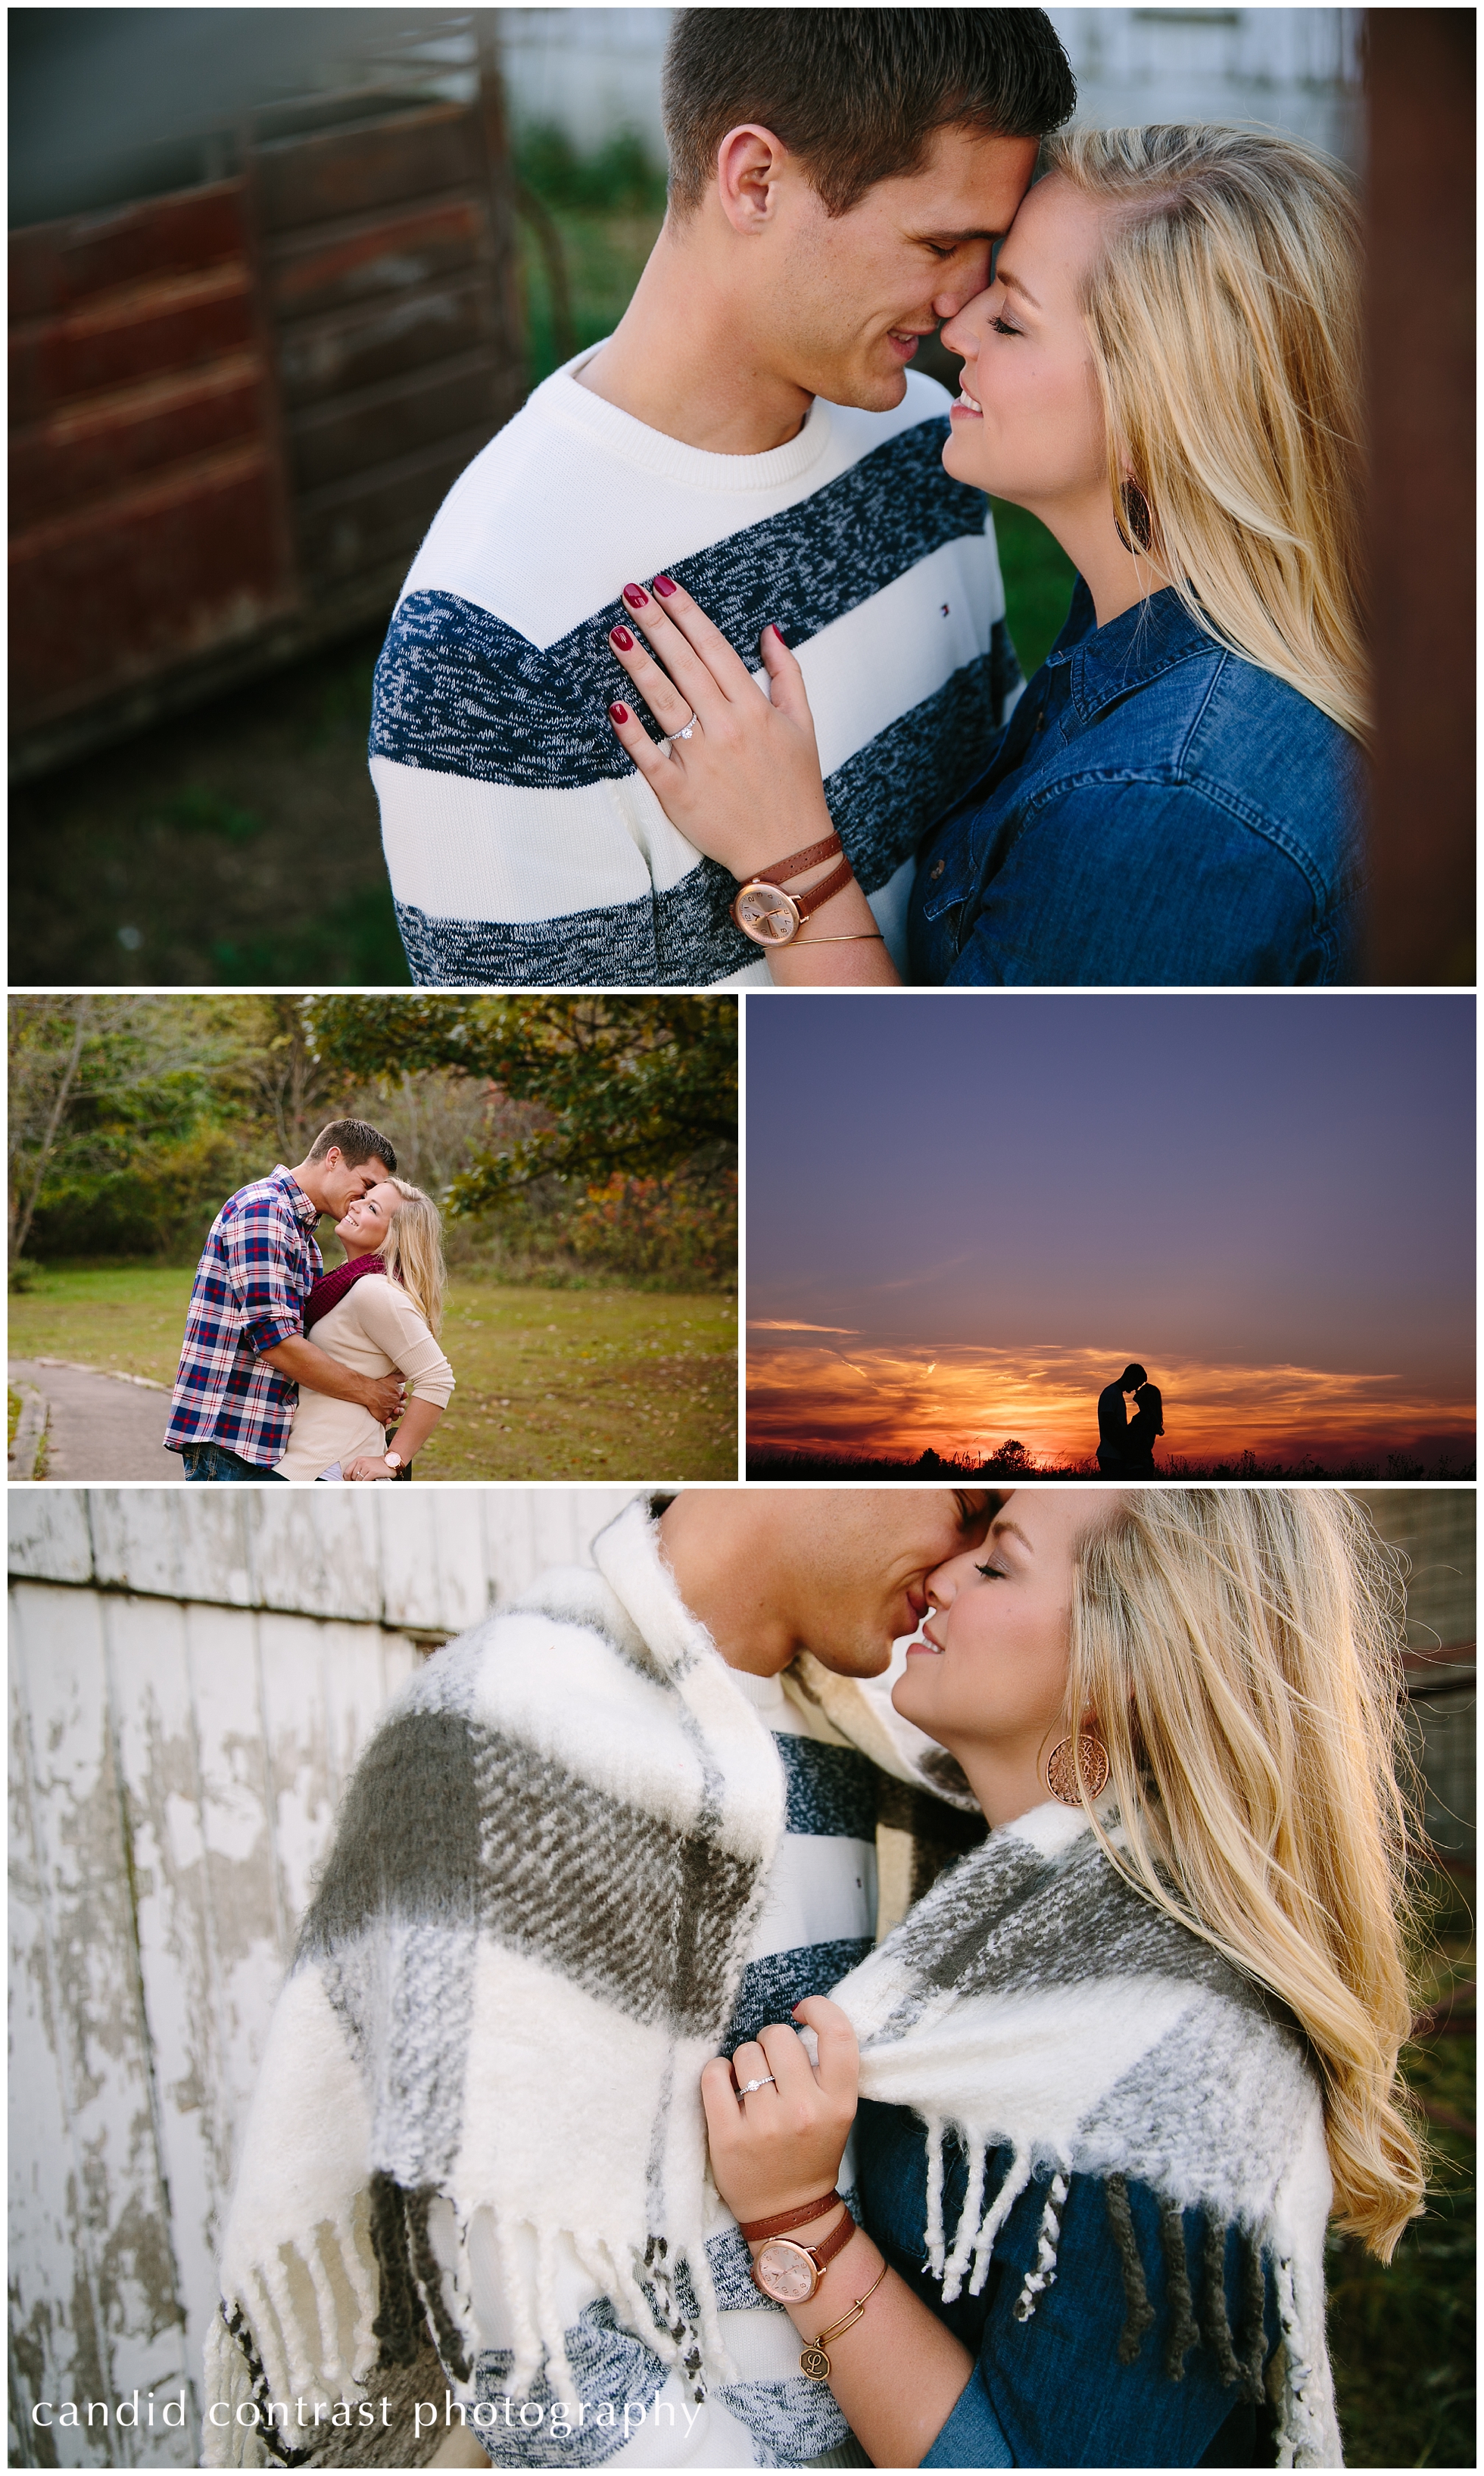 fall engagement session and engagement ring at mines of spain in dubuque iowa, fall farm engagement session at sunset